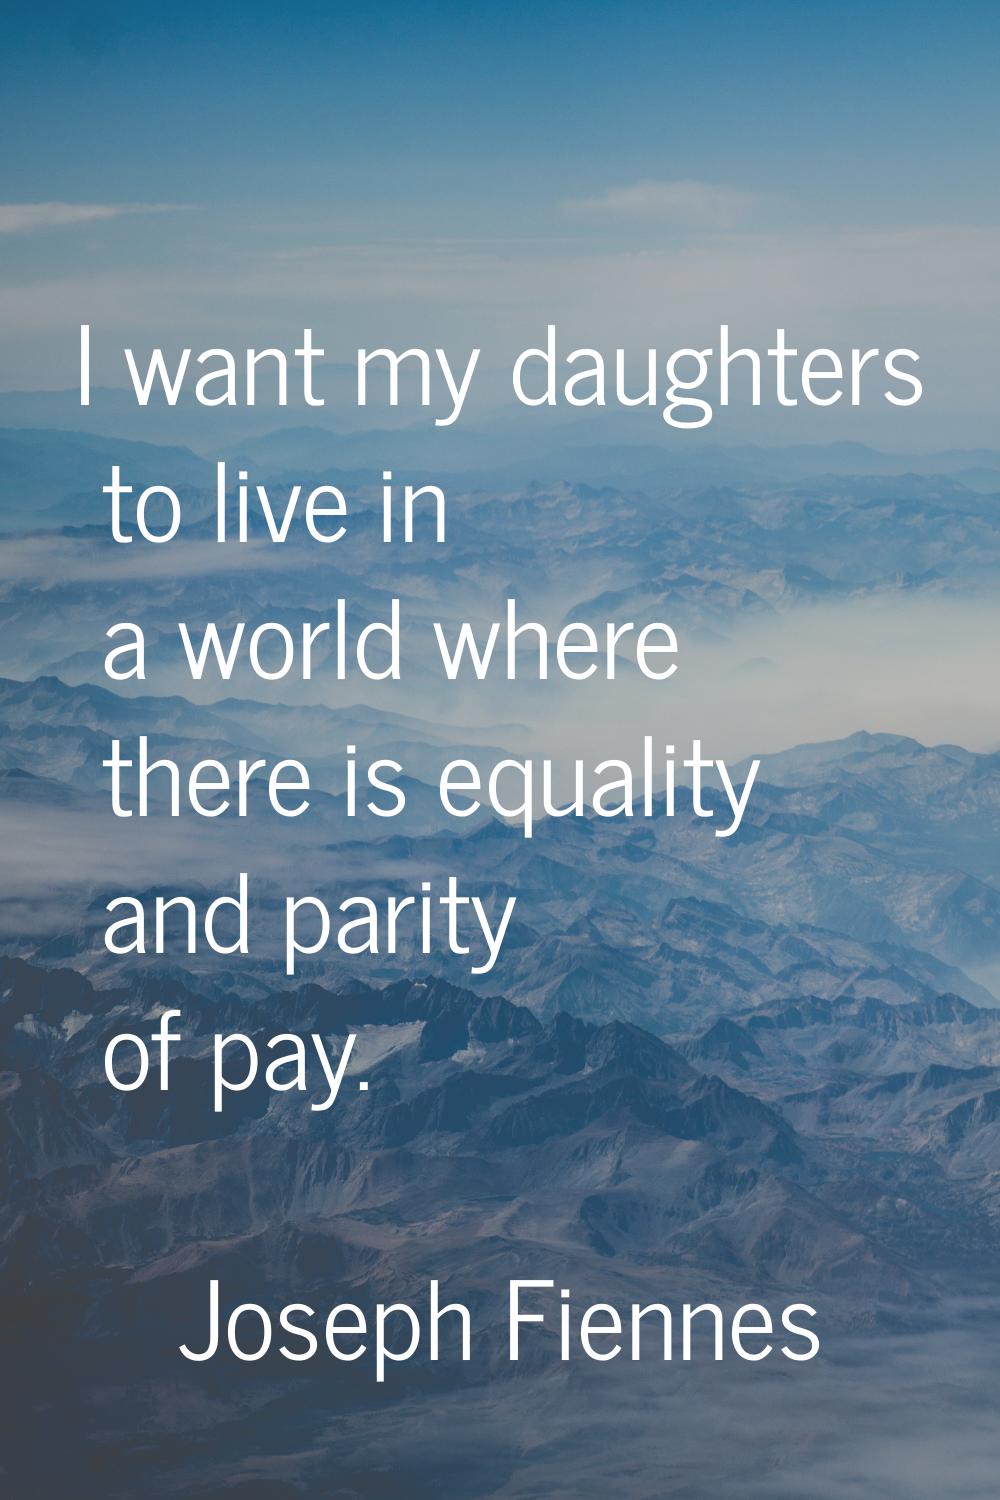 I want my daughters to live in a world where there is equality and parity of pay.